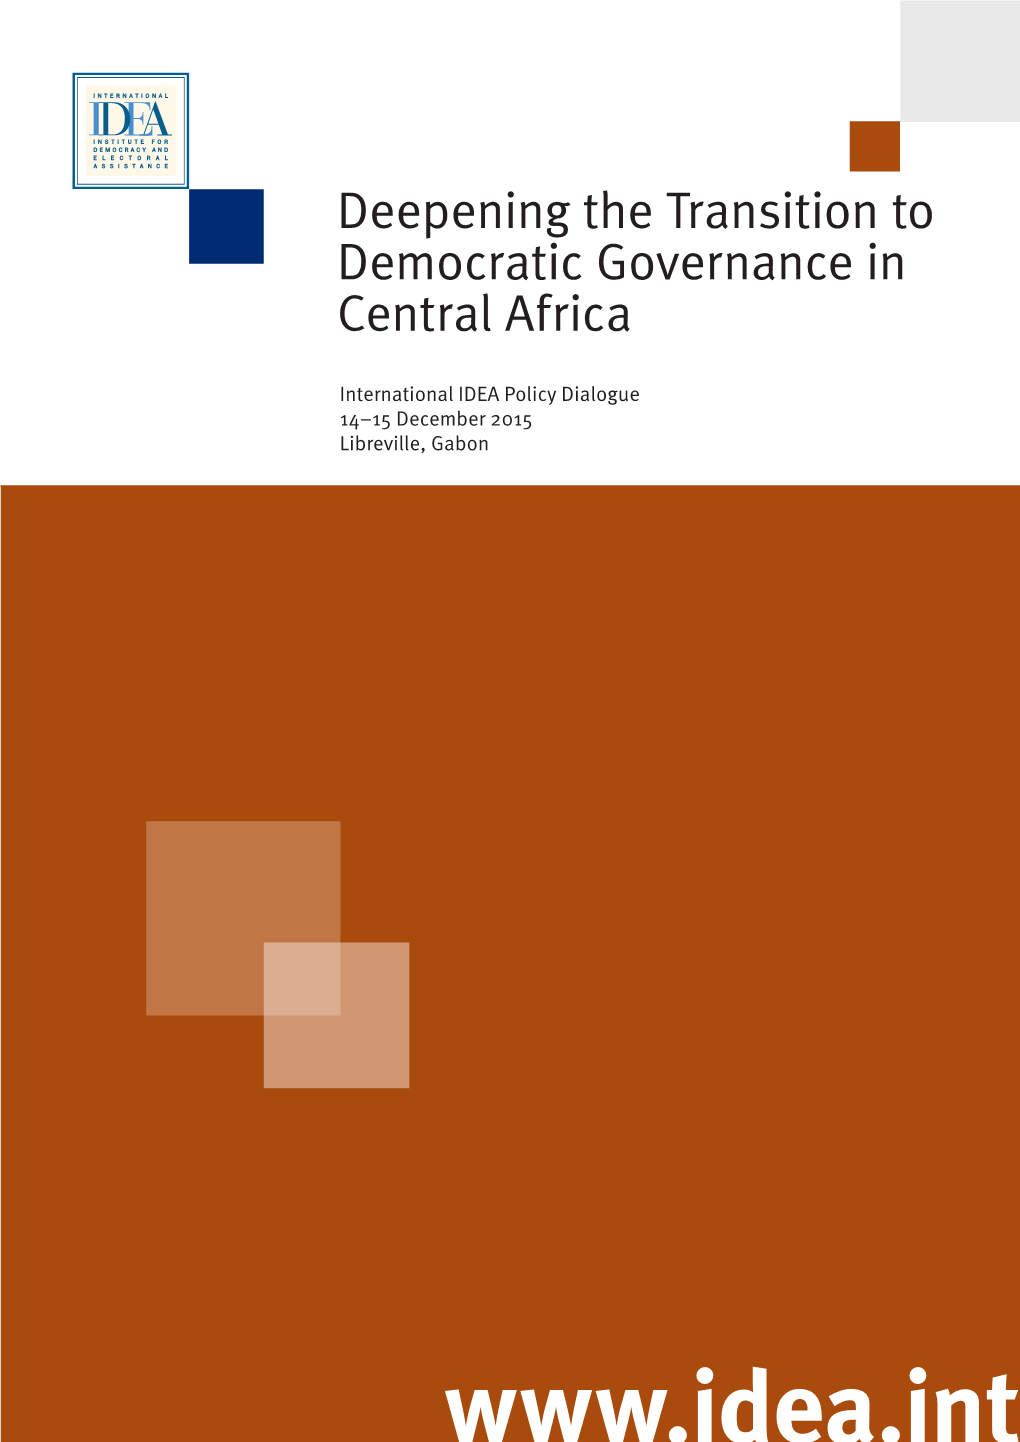 Deepening the Transition to Democratic Governance in Africa